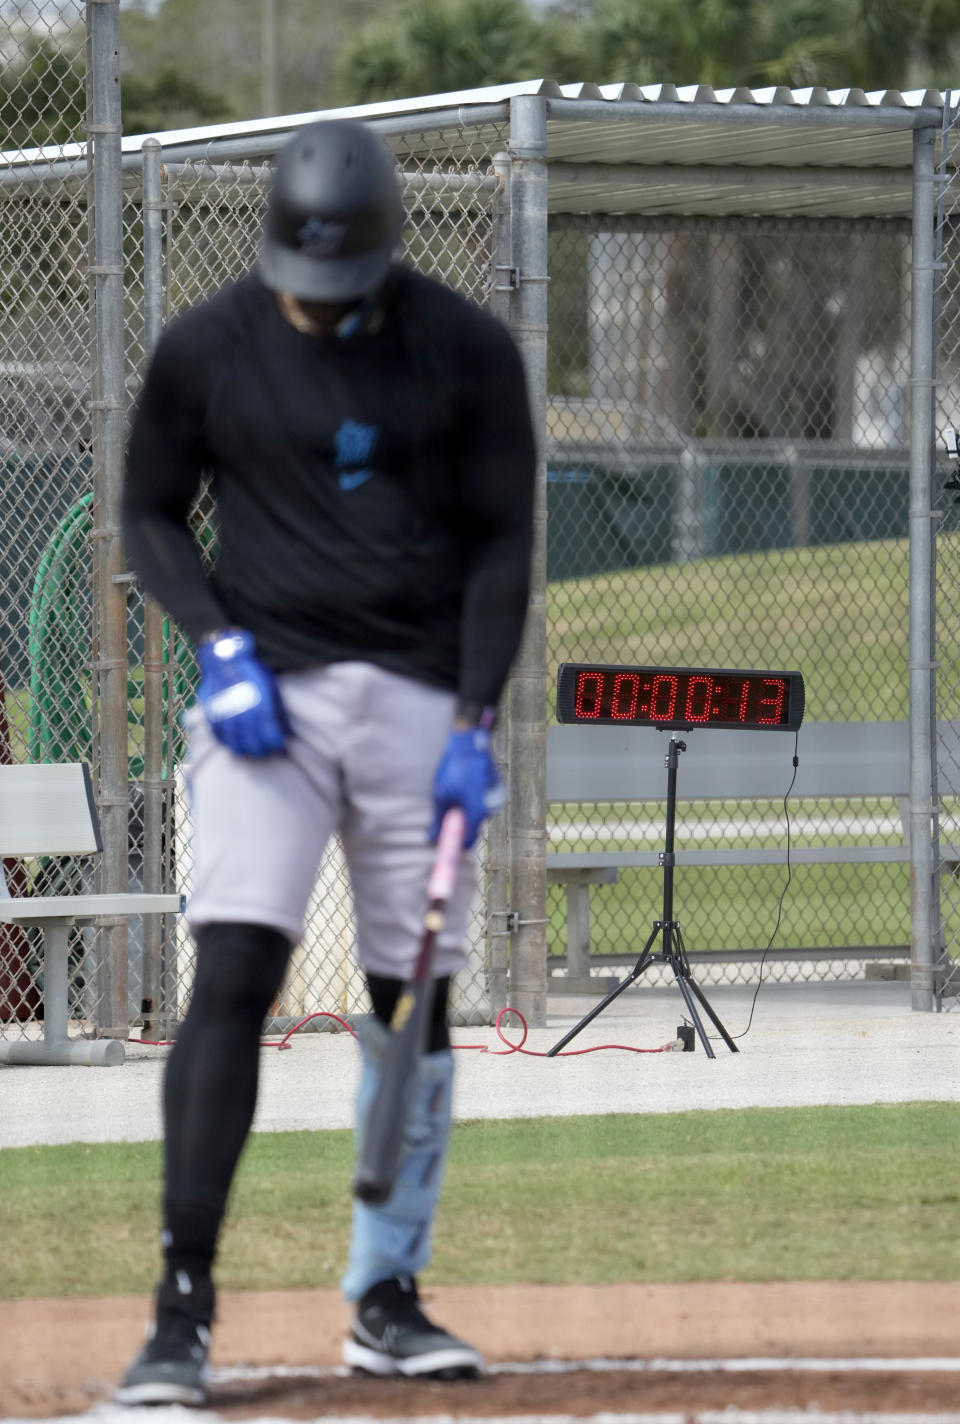 Miami Marlins' Jorge Soler steps into the batter's box as a pitch clock is seen in the background during spring training baseball practice Sunday, Feb. 19, 2023, in Jupiter, Fla. (AP Photo/Jeff Roberson)